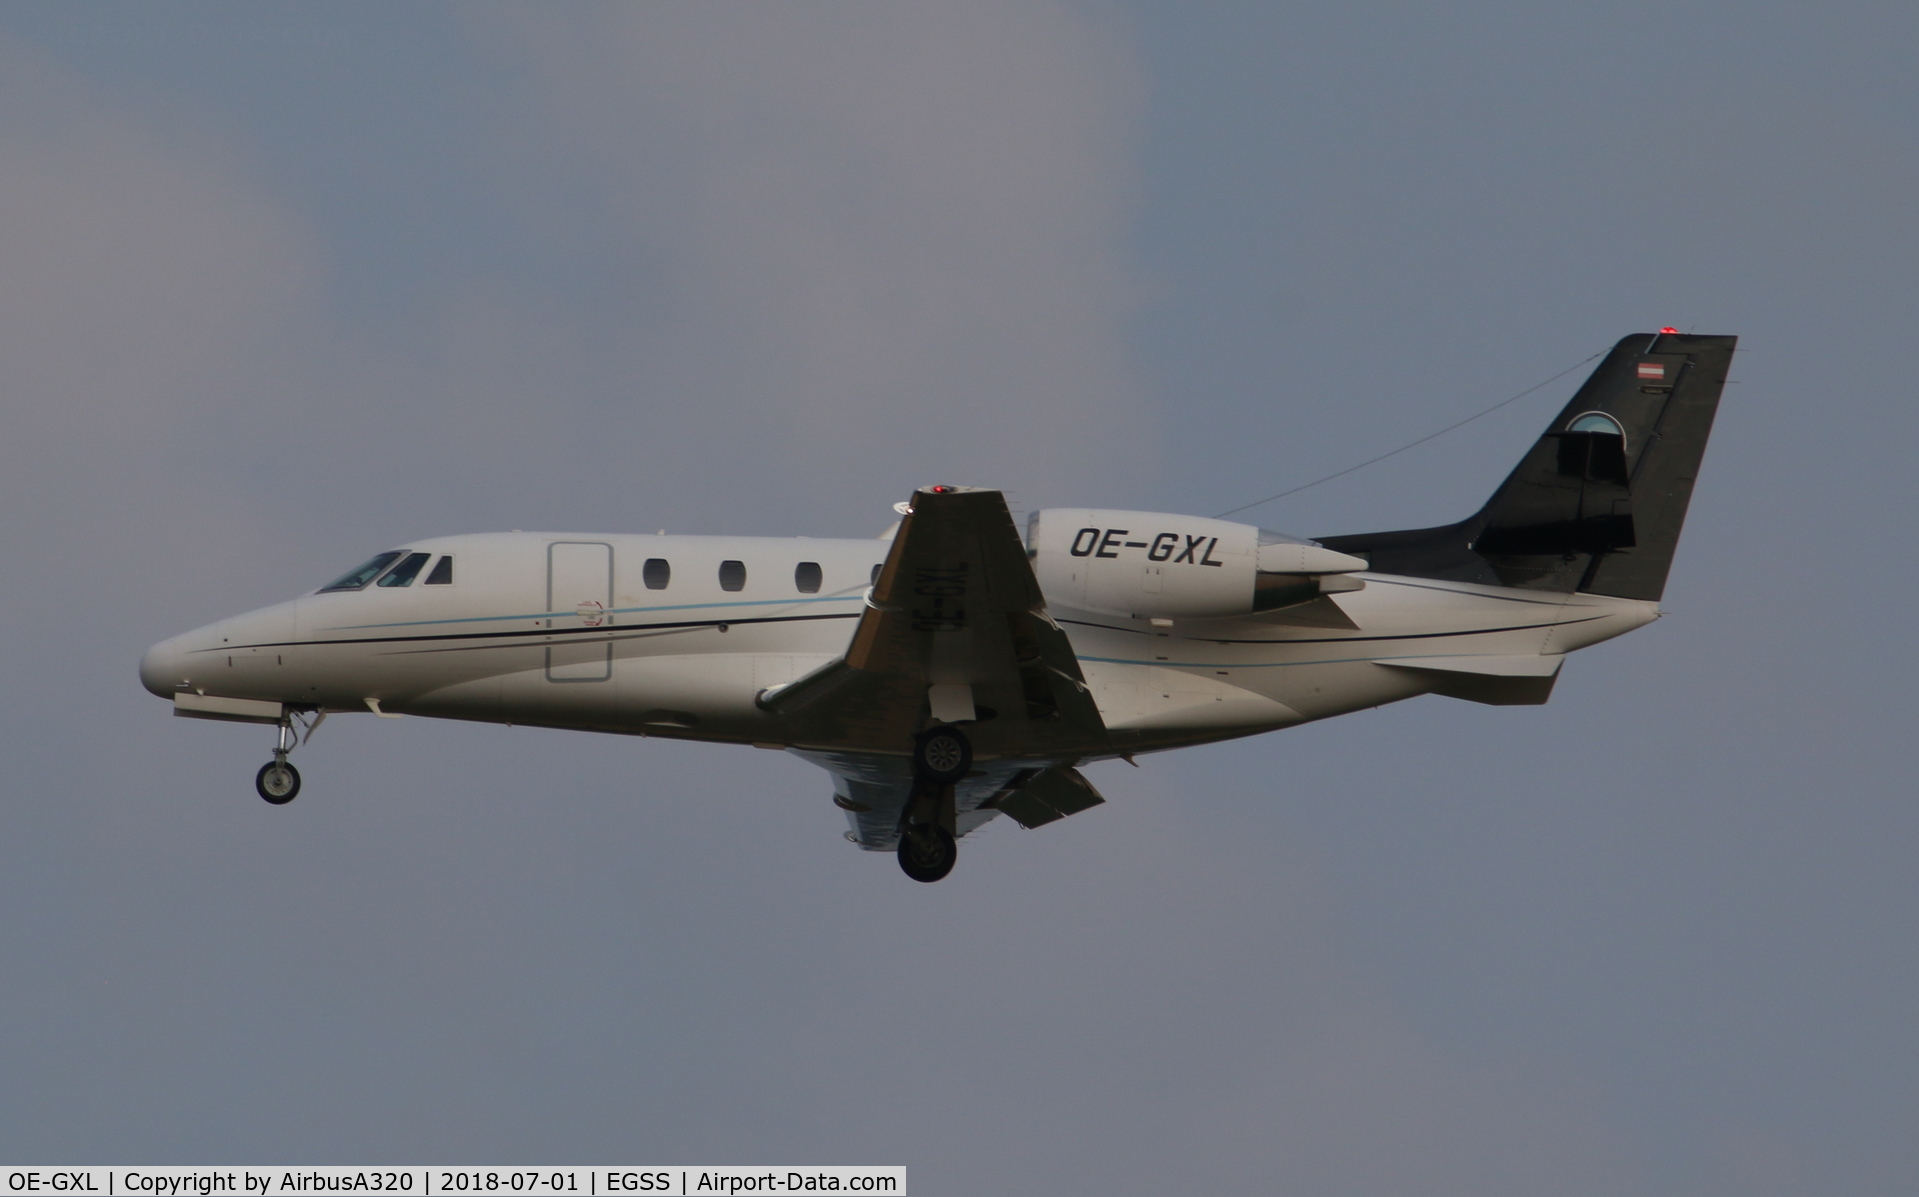 OE-GXL, 2001 Cessna 560XL Citation Excel C/N 560-5154, Arriving at Stansted